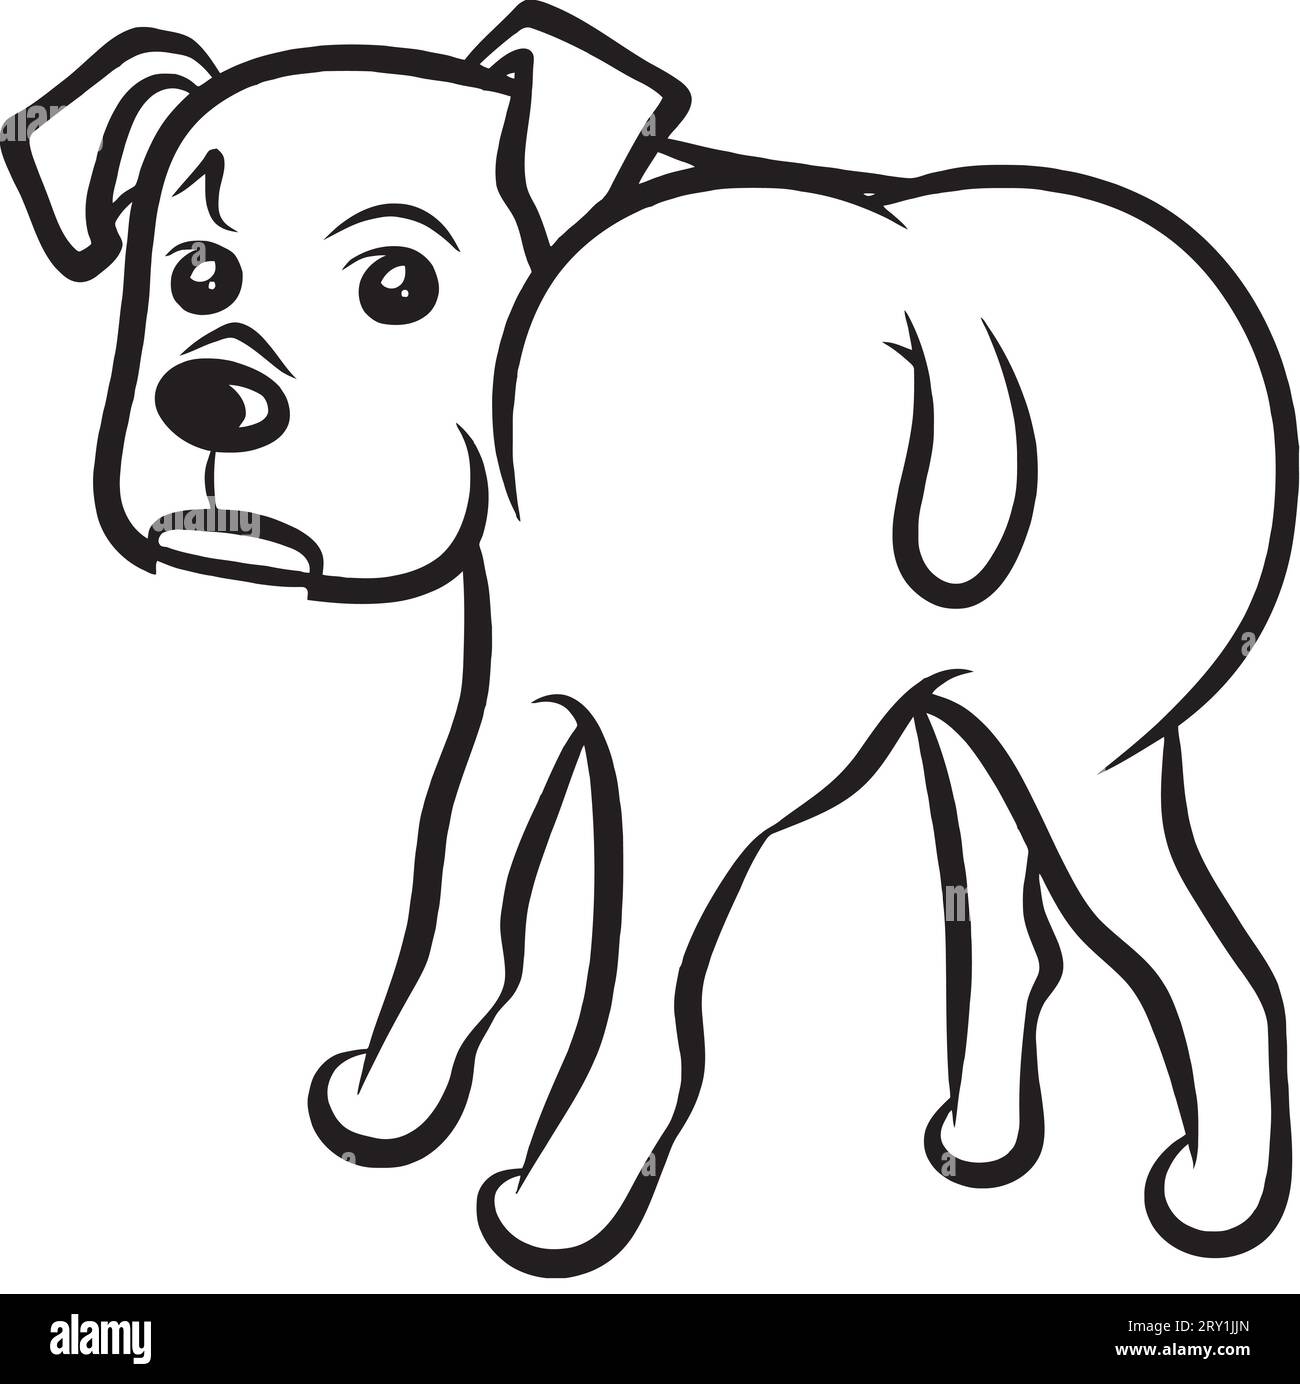 Cute Dog Coloring Pages to Print - Crafty Morning